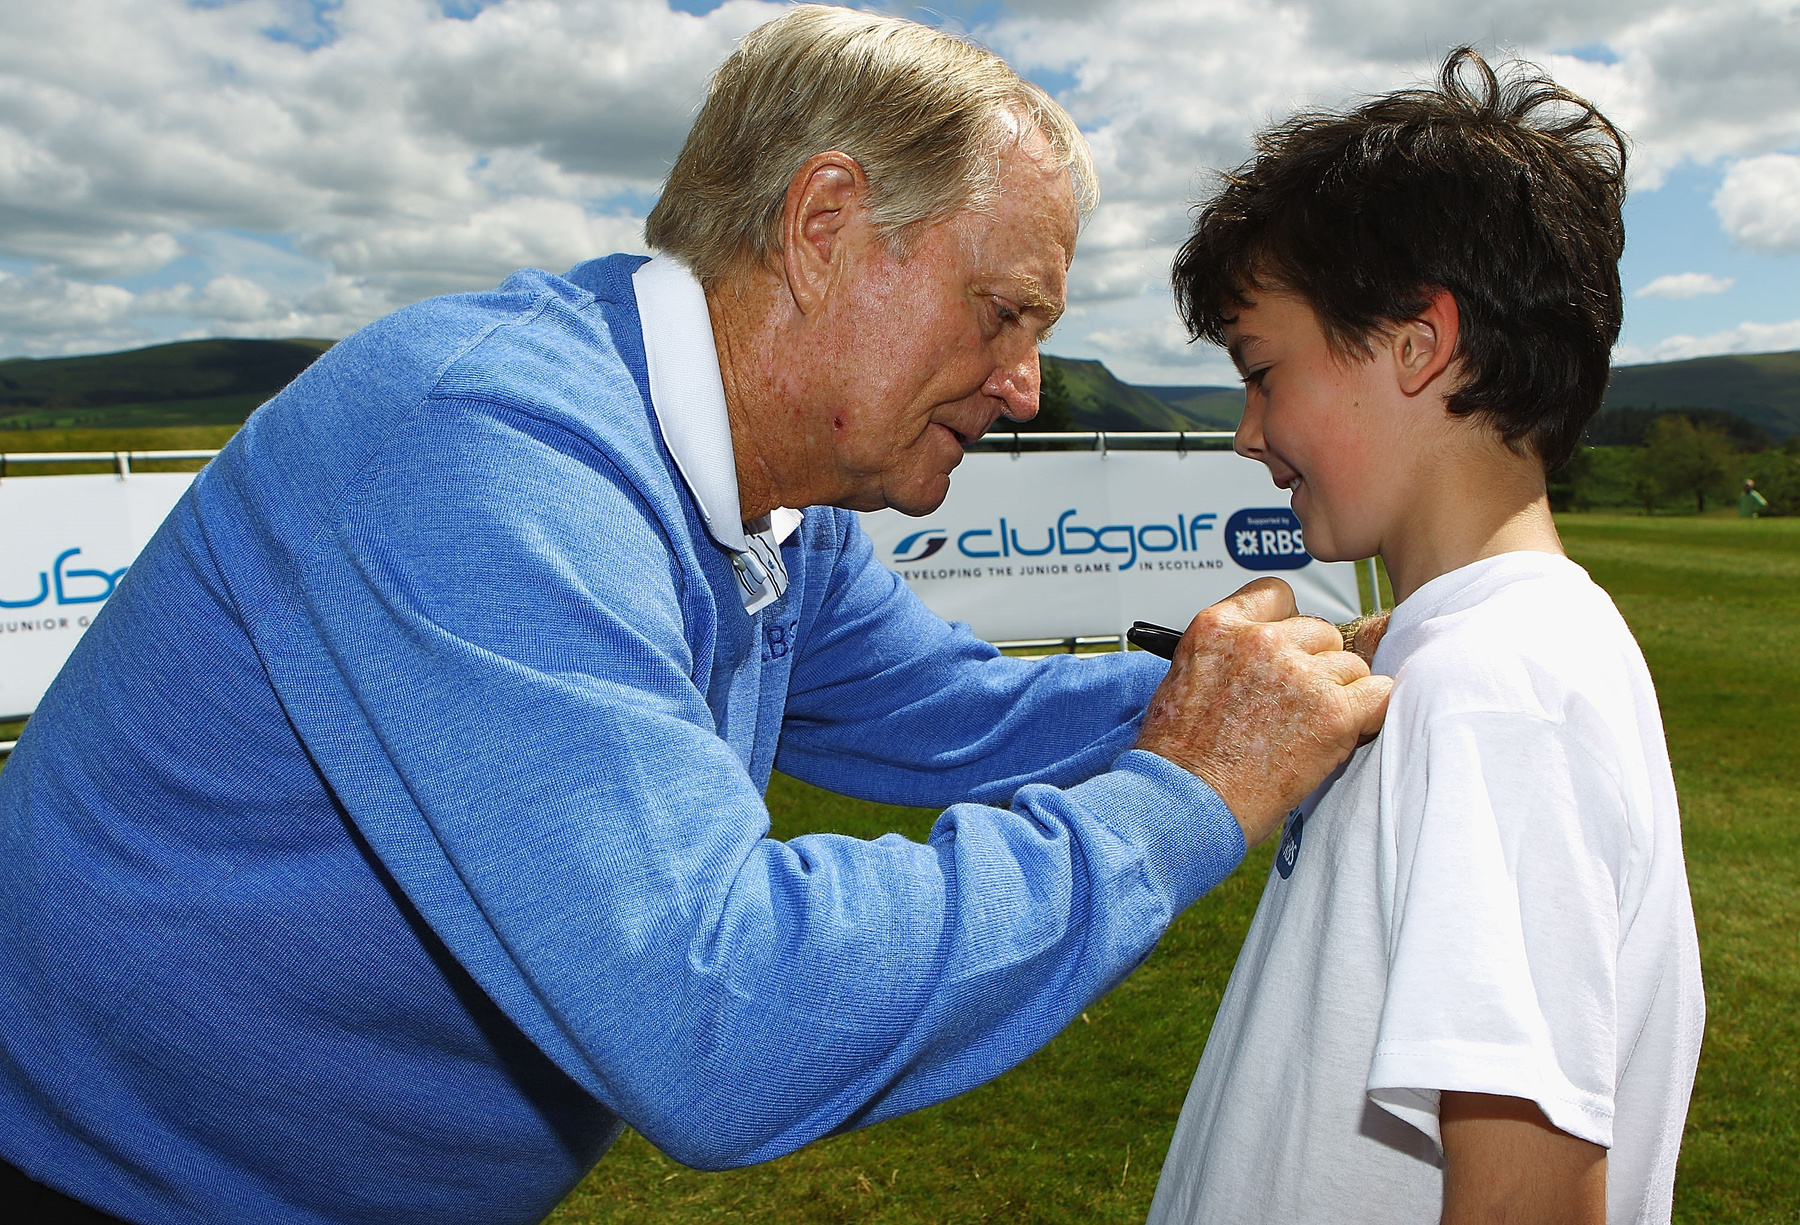 RBS/SGU clubgolf partnership with Jack Nicklaus Launch